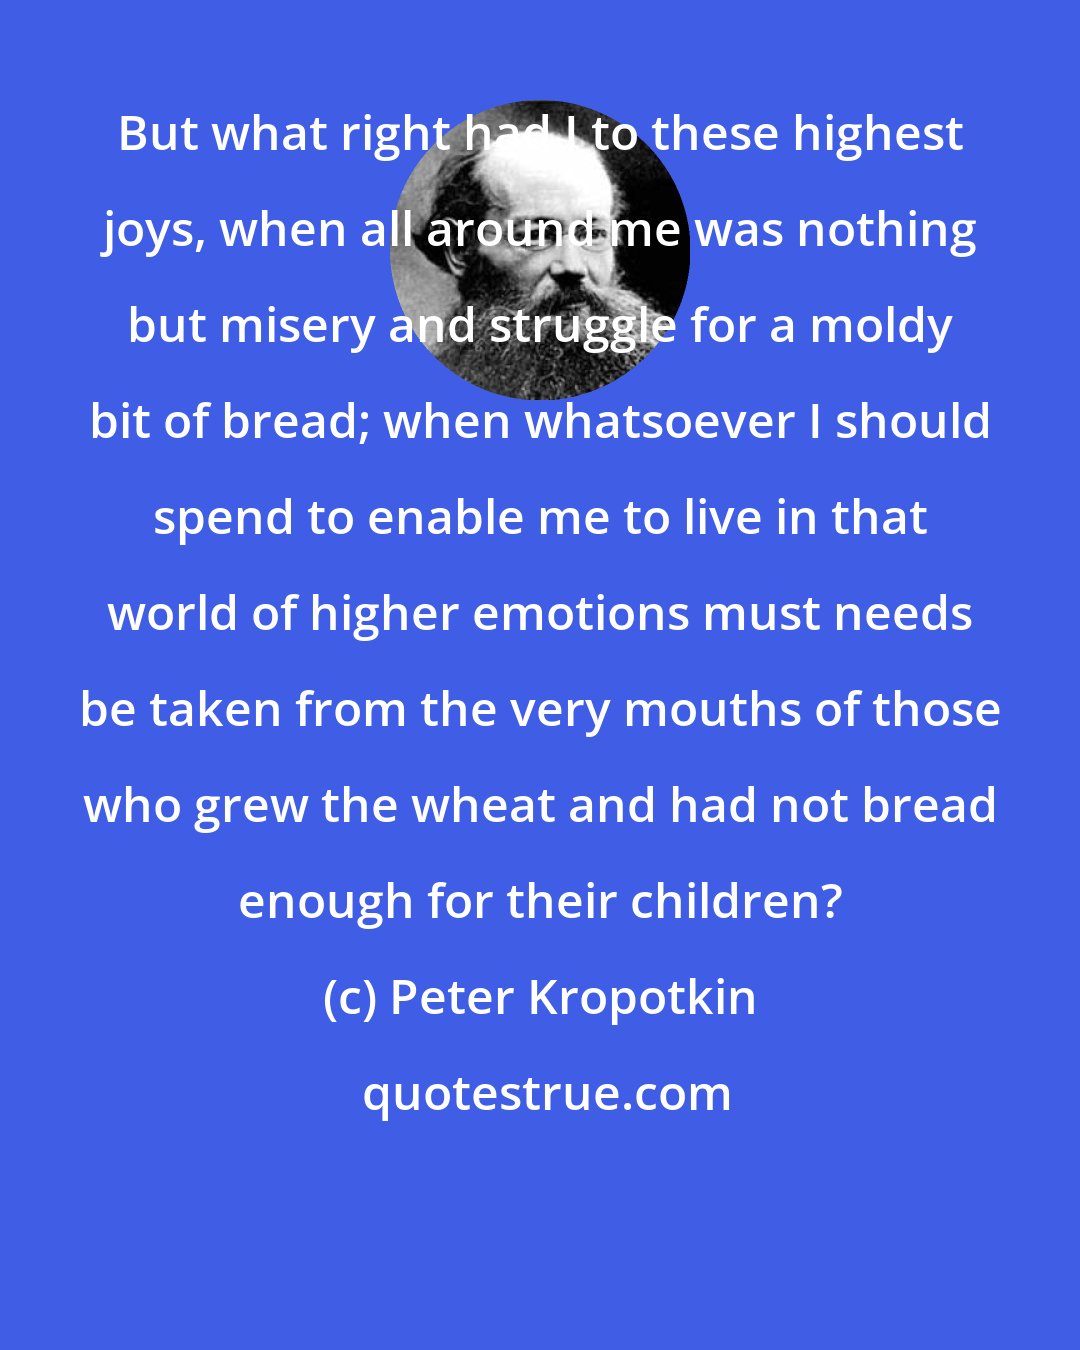 Peter Kropotkin: But what right had I to these highest joys, when all around me was nothing but misery and struggle for a moldy bit of bread; when whatsoever I should spend to enable me to live in that world of higher emotions must needs be taken from the very mouths of those who grew the wheat and had not bread enough for their children?